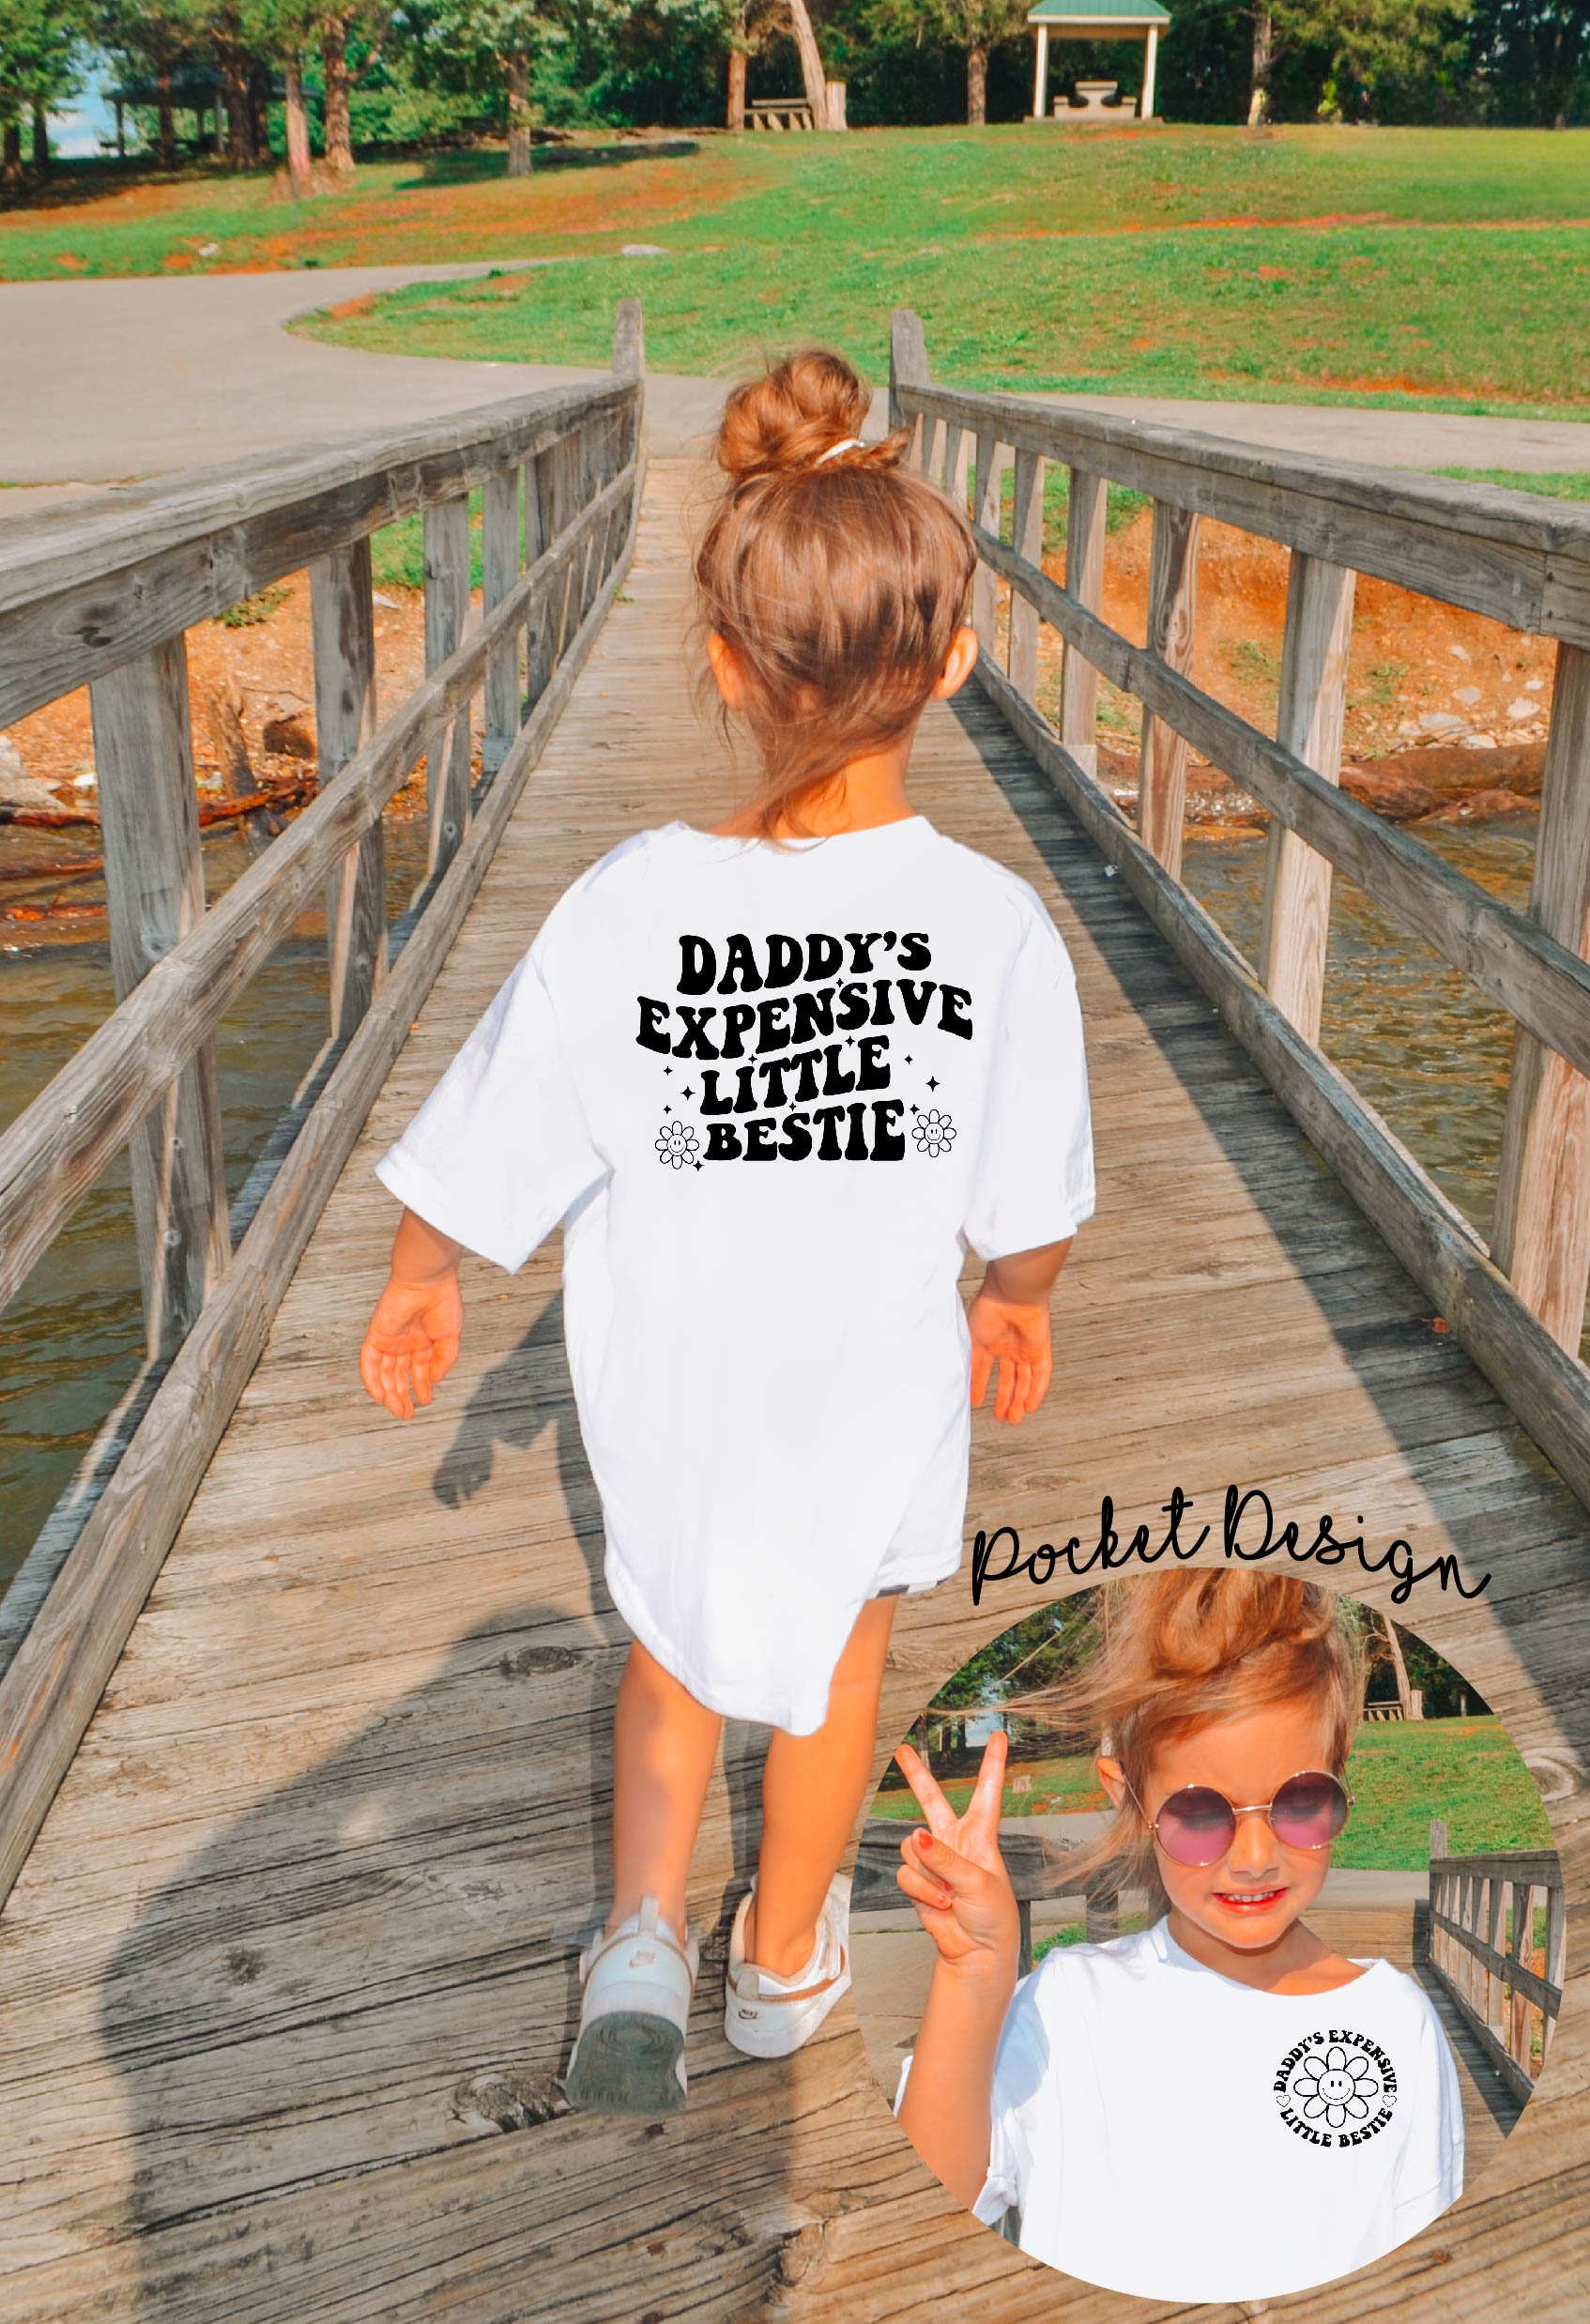 Daddy's Expensive Little Bestie/White (with pocket design) Sweatshirts also available